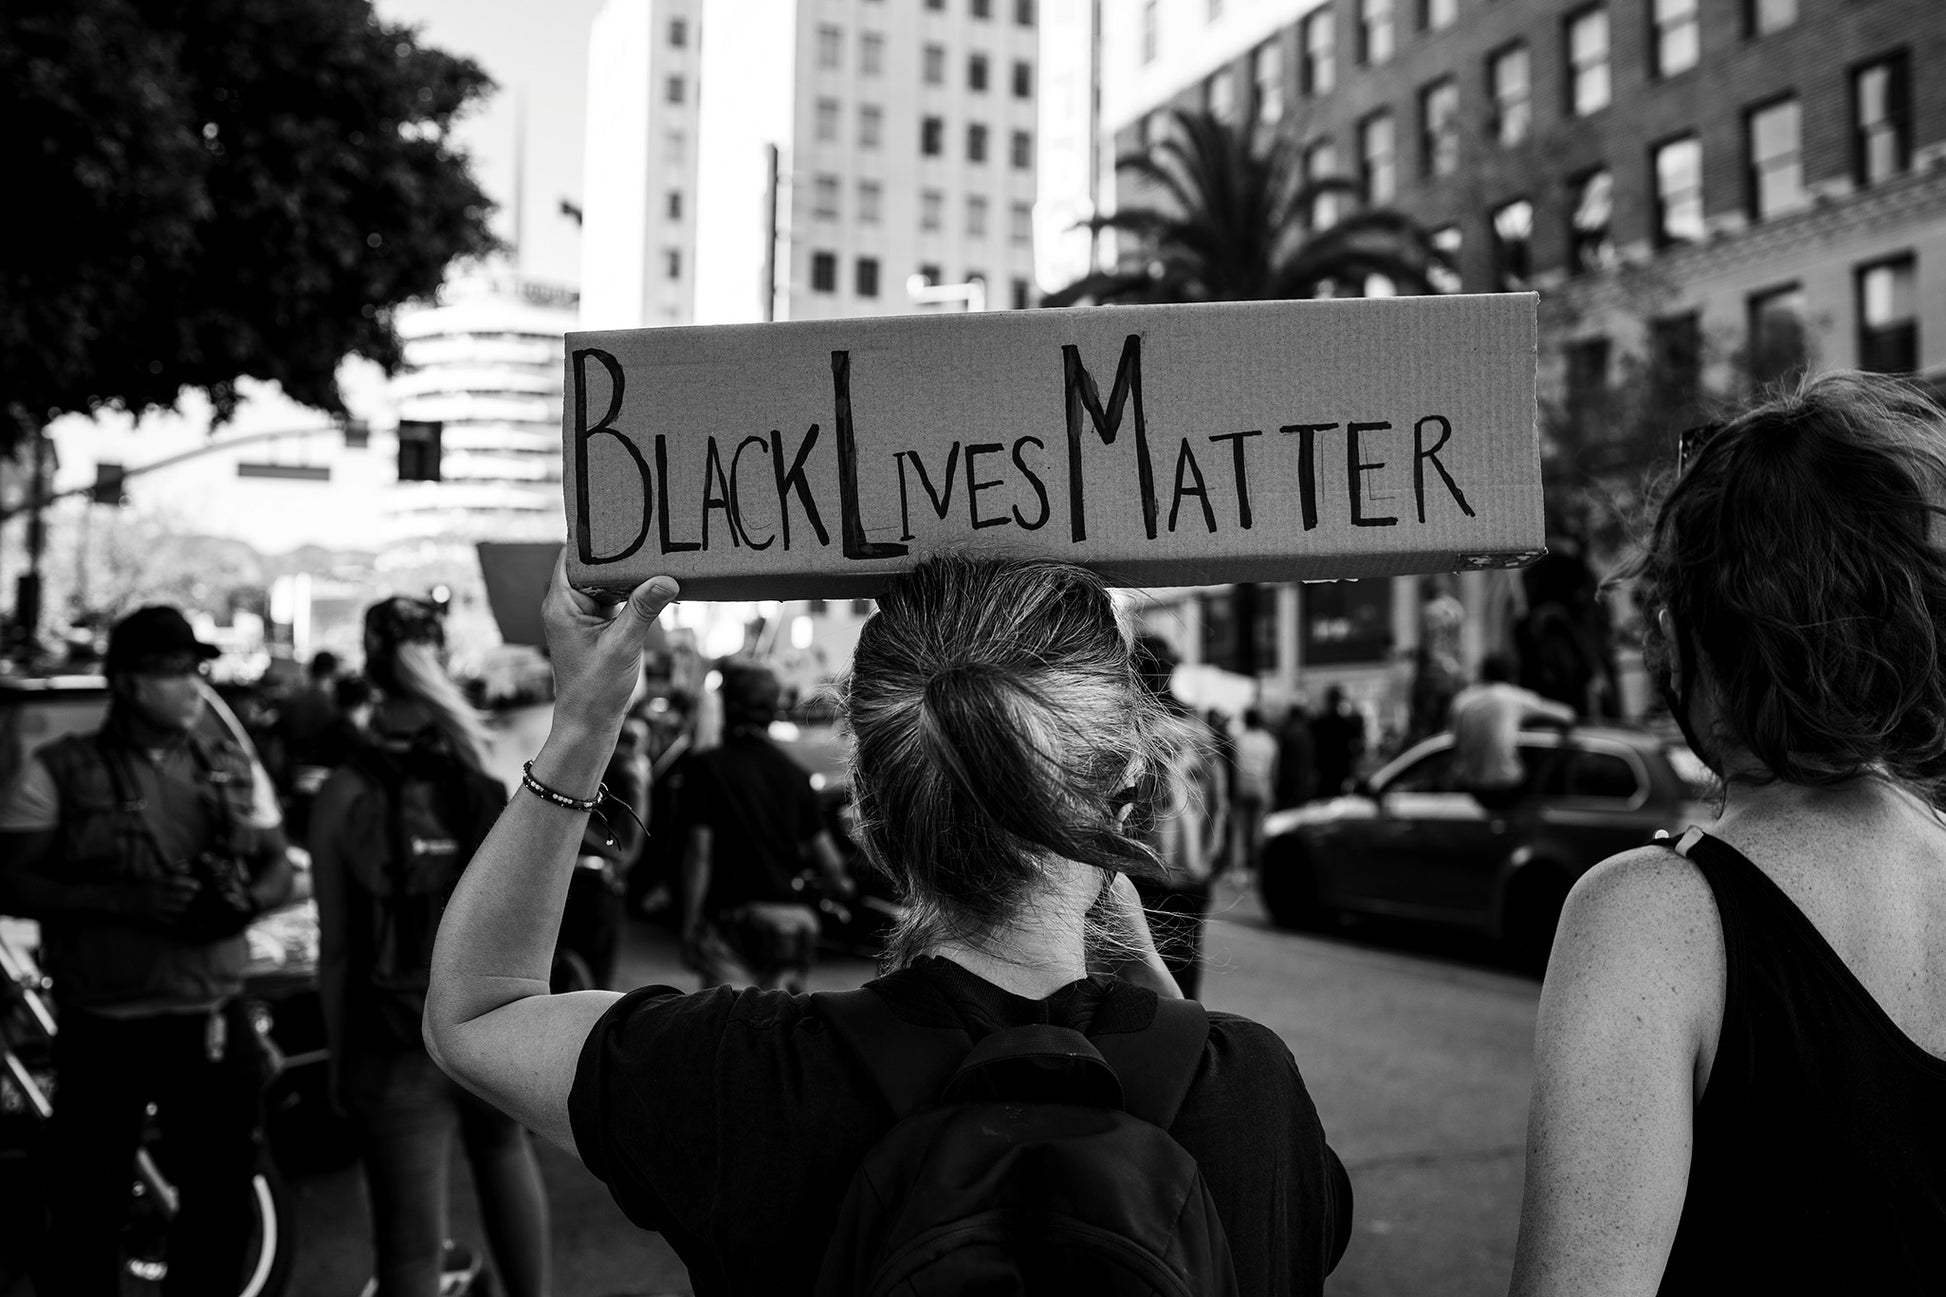 "Advocate" is a black and white fine art photograph captured during the Black Lives Matter March in Hollywood, California, on June 7, 2020. Shot from behind, the image portrays a woman with her head held high, adorned with a Black Lives Matter cardboard sign.  By Shannon Black